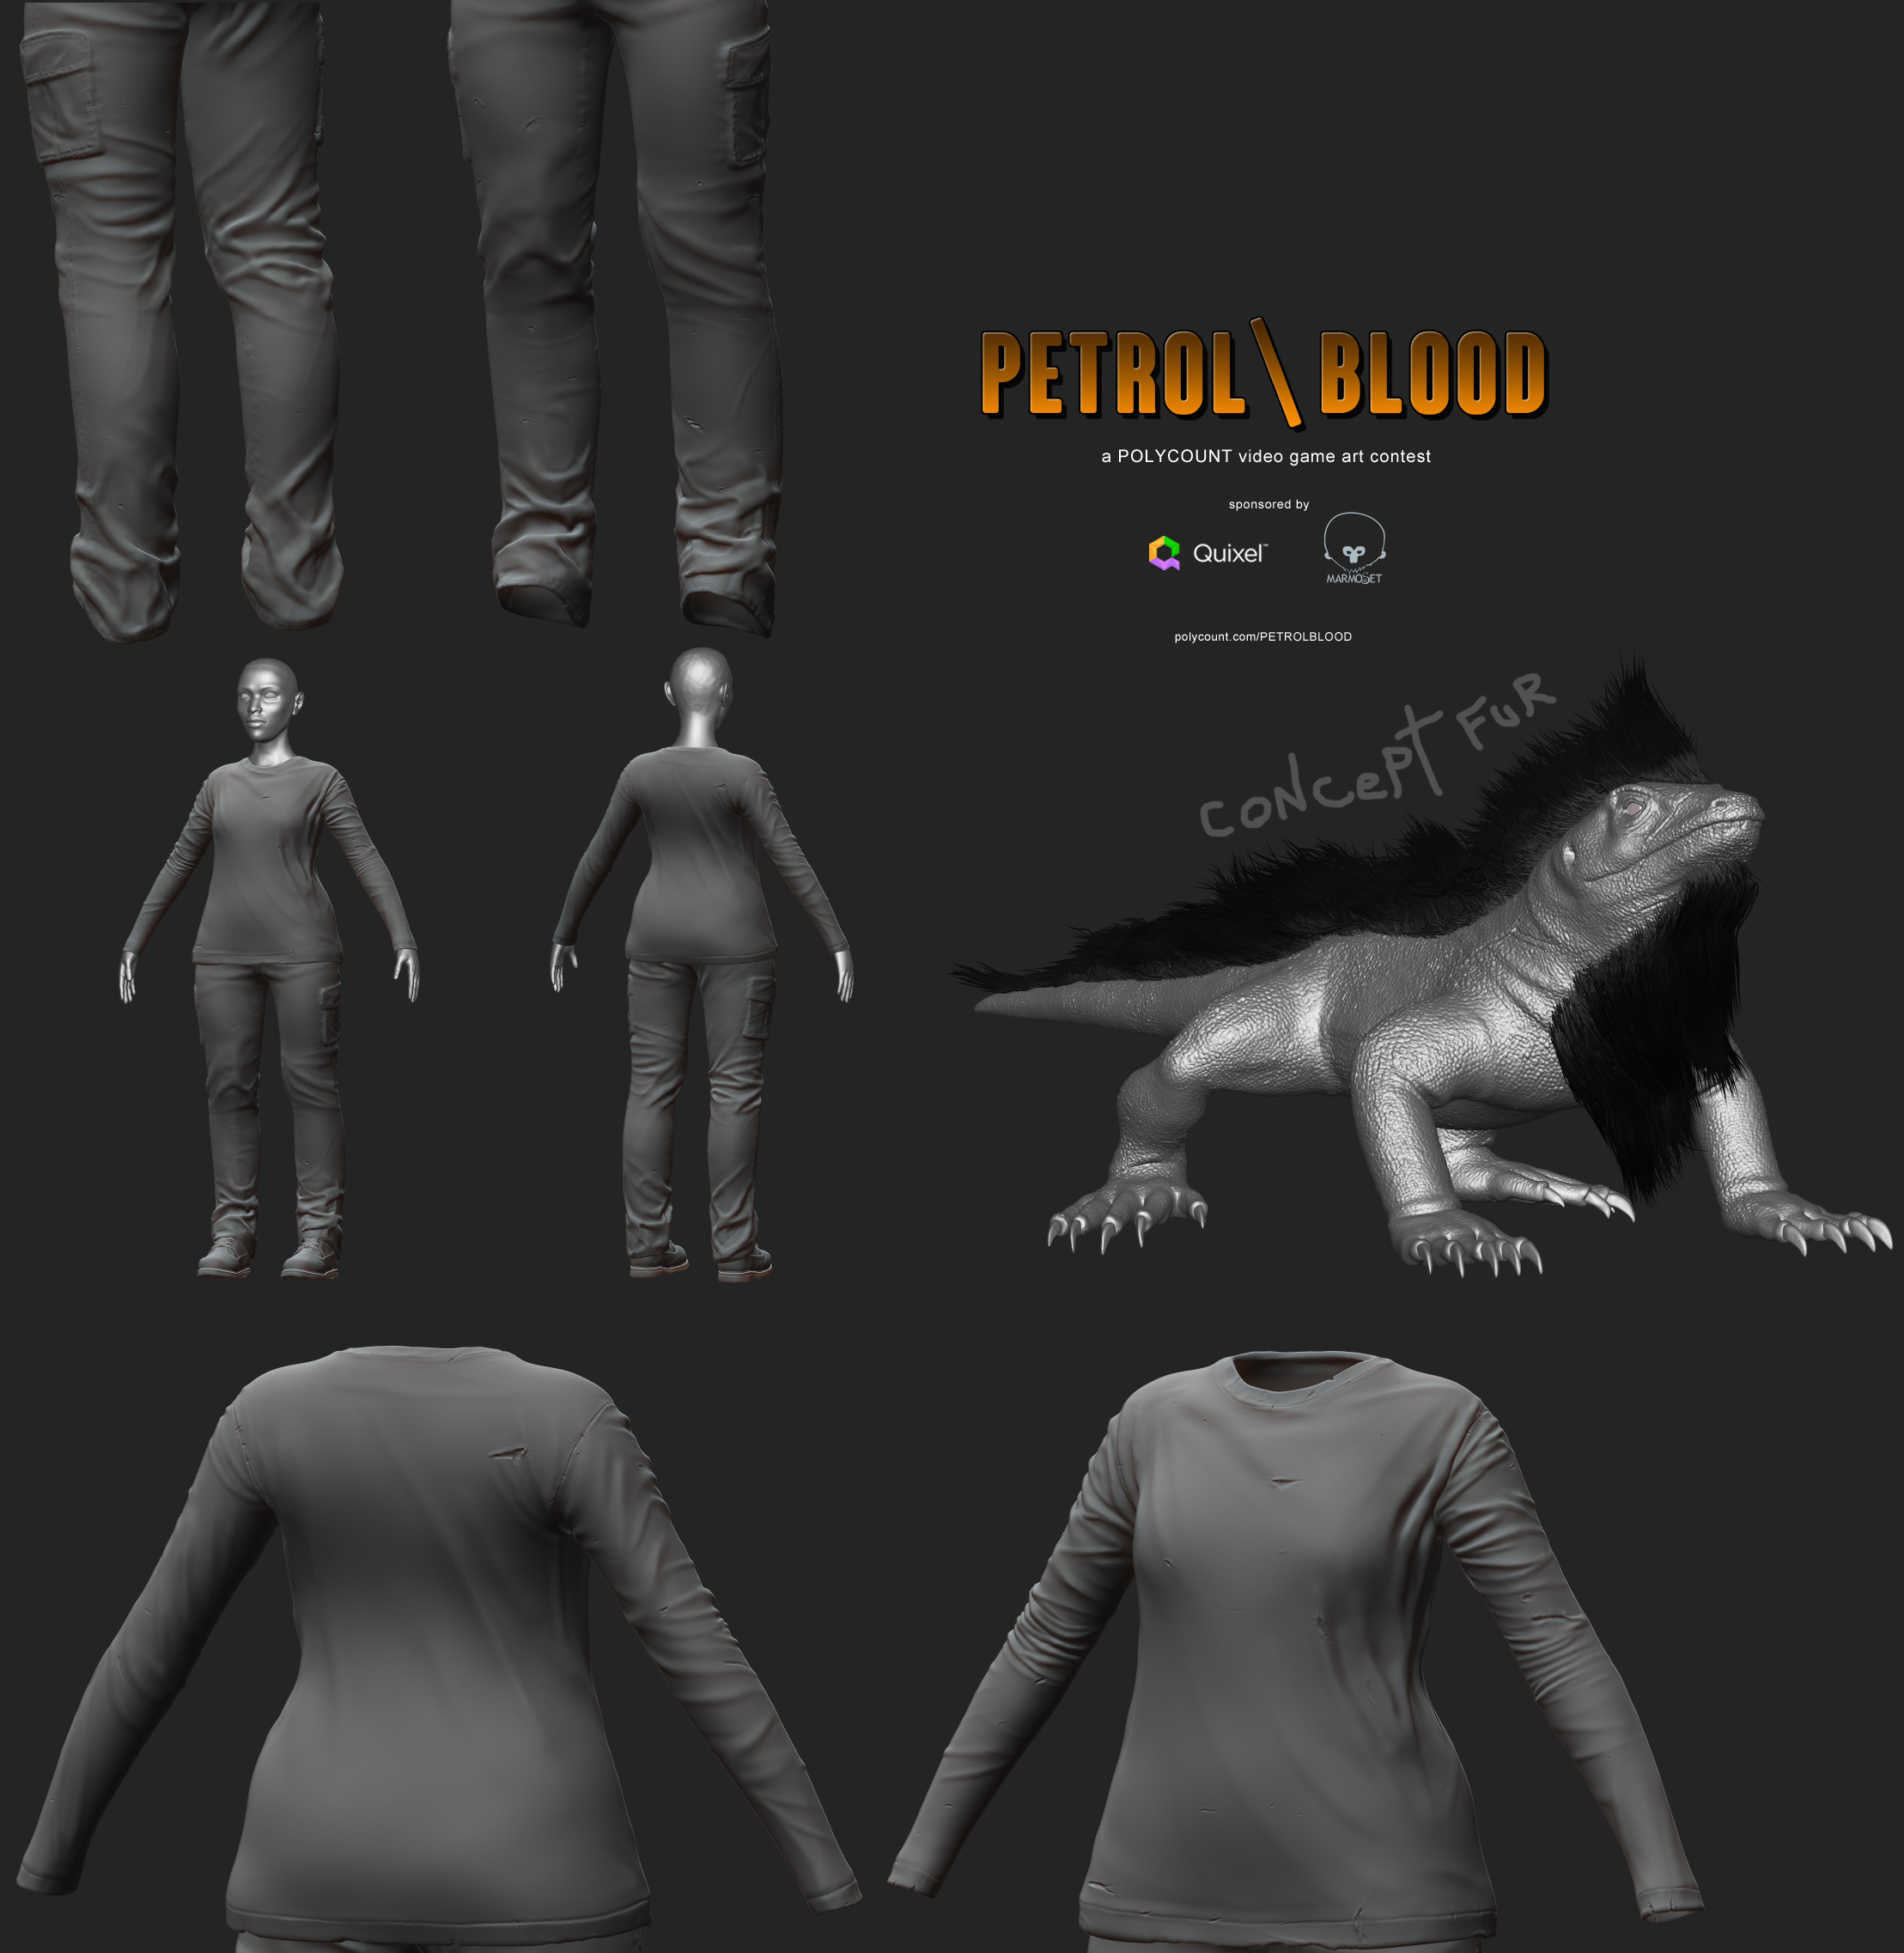 petroblood_wip0_6_by_theartistictiger-d7s9p00.jpg